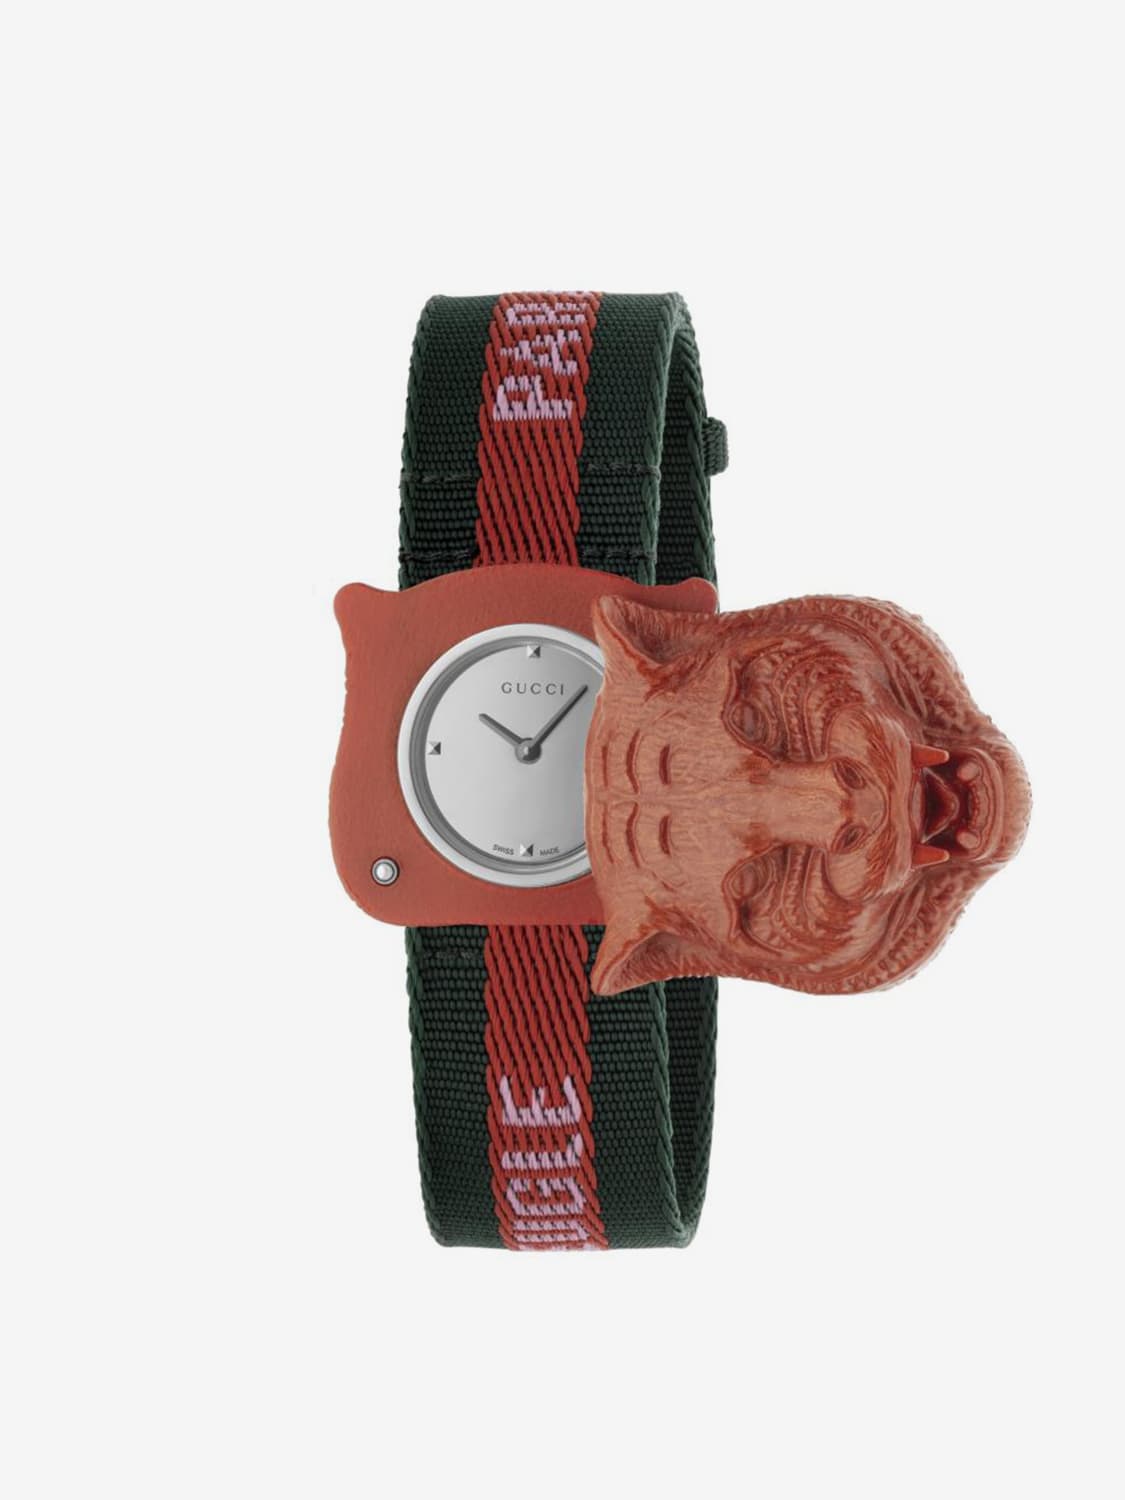 Watch Gucci: Gucci watch for man red 2